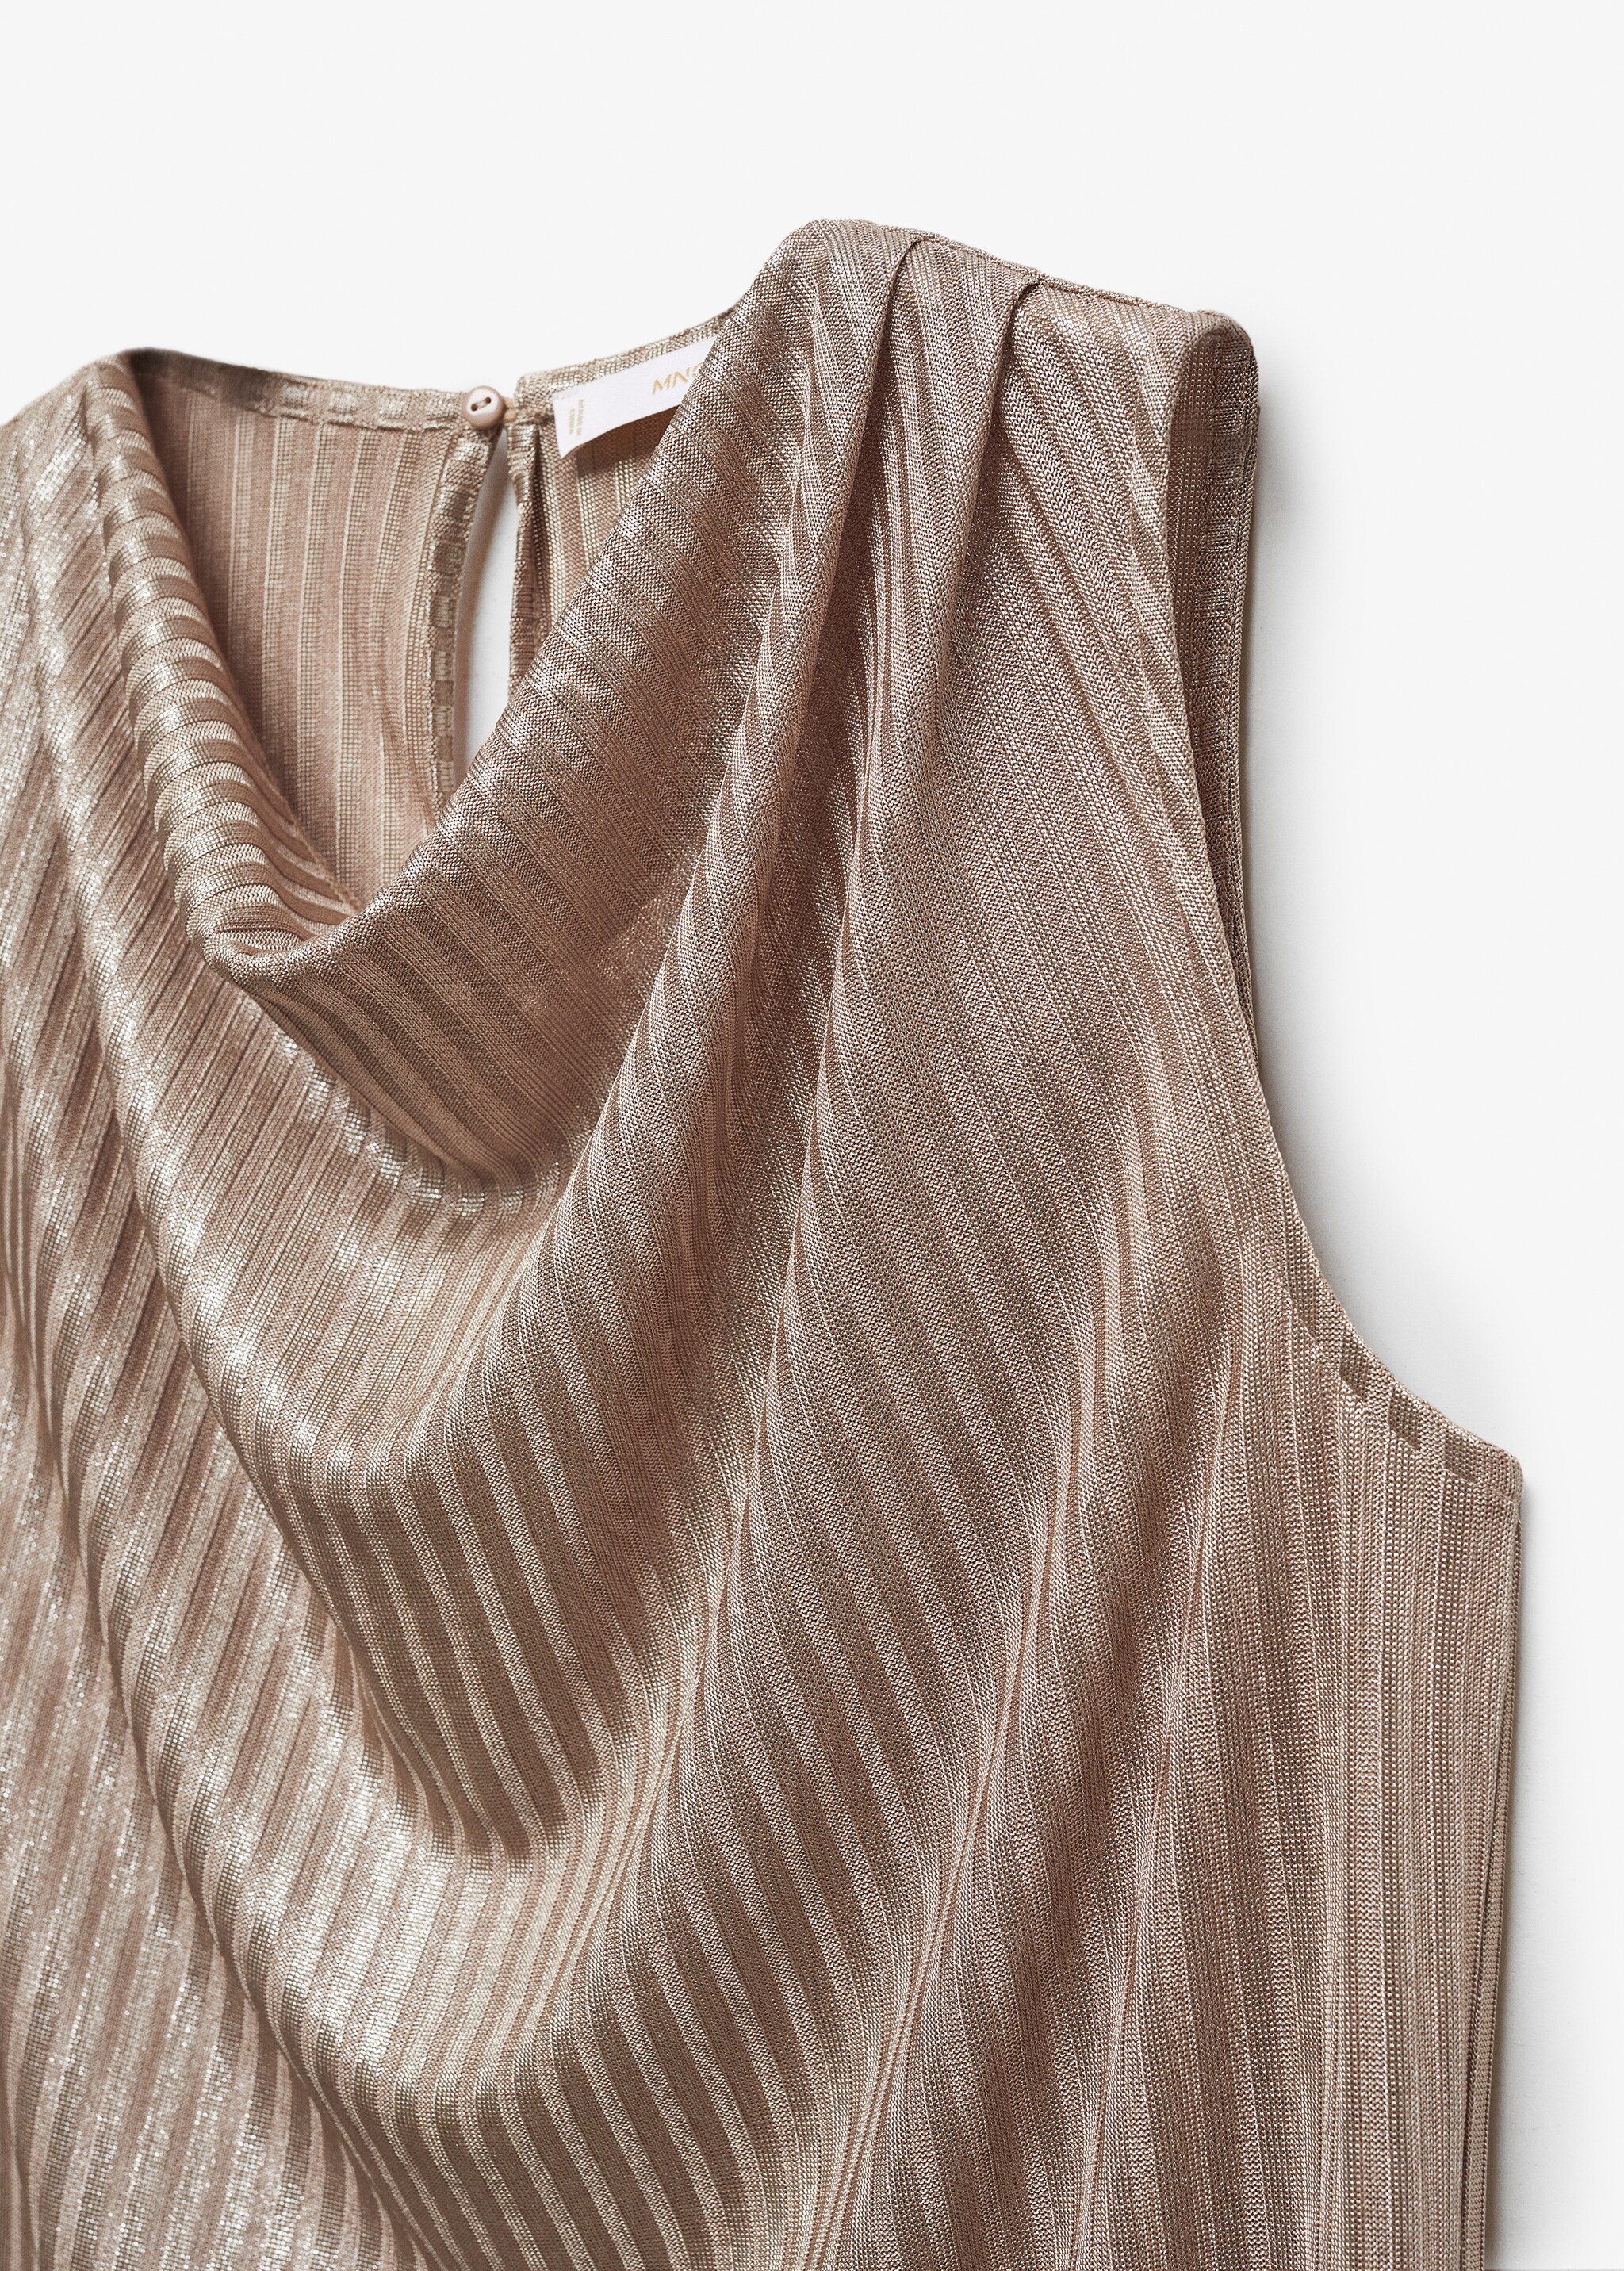 Draped neckline top - Details of the article 8